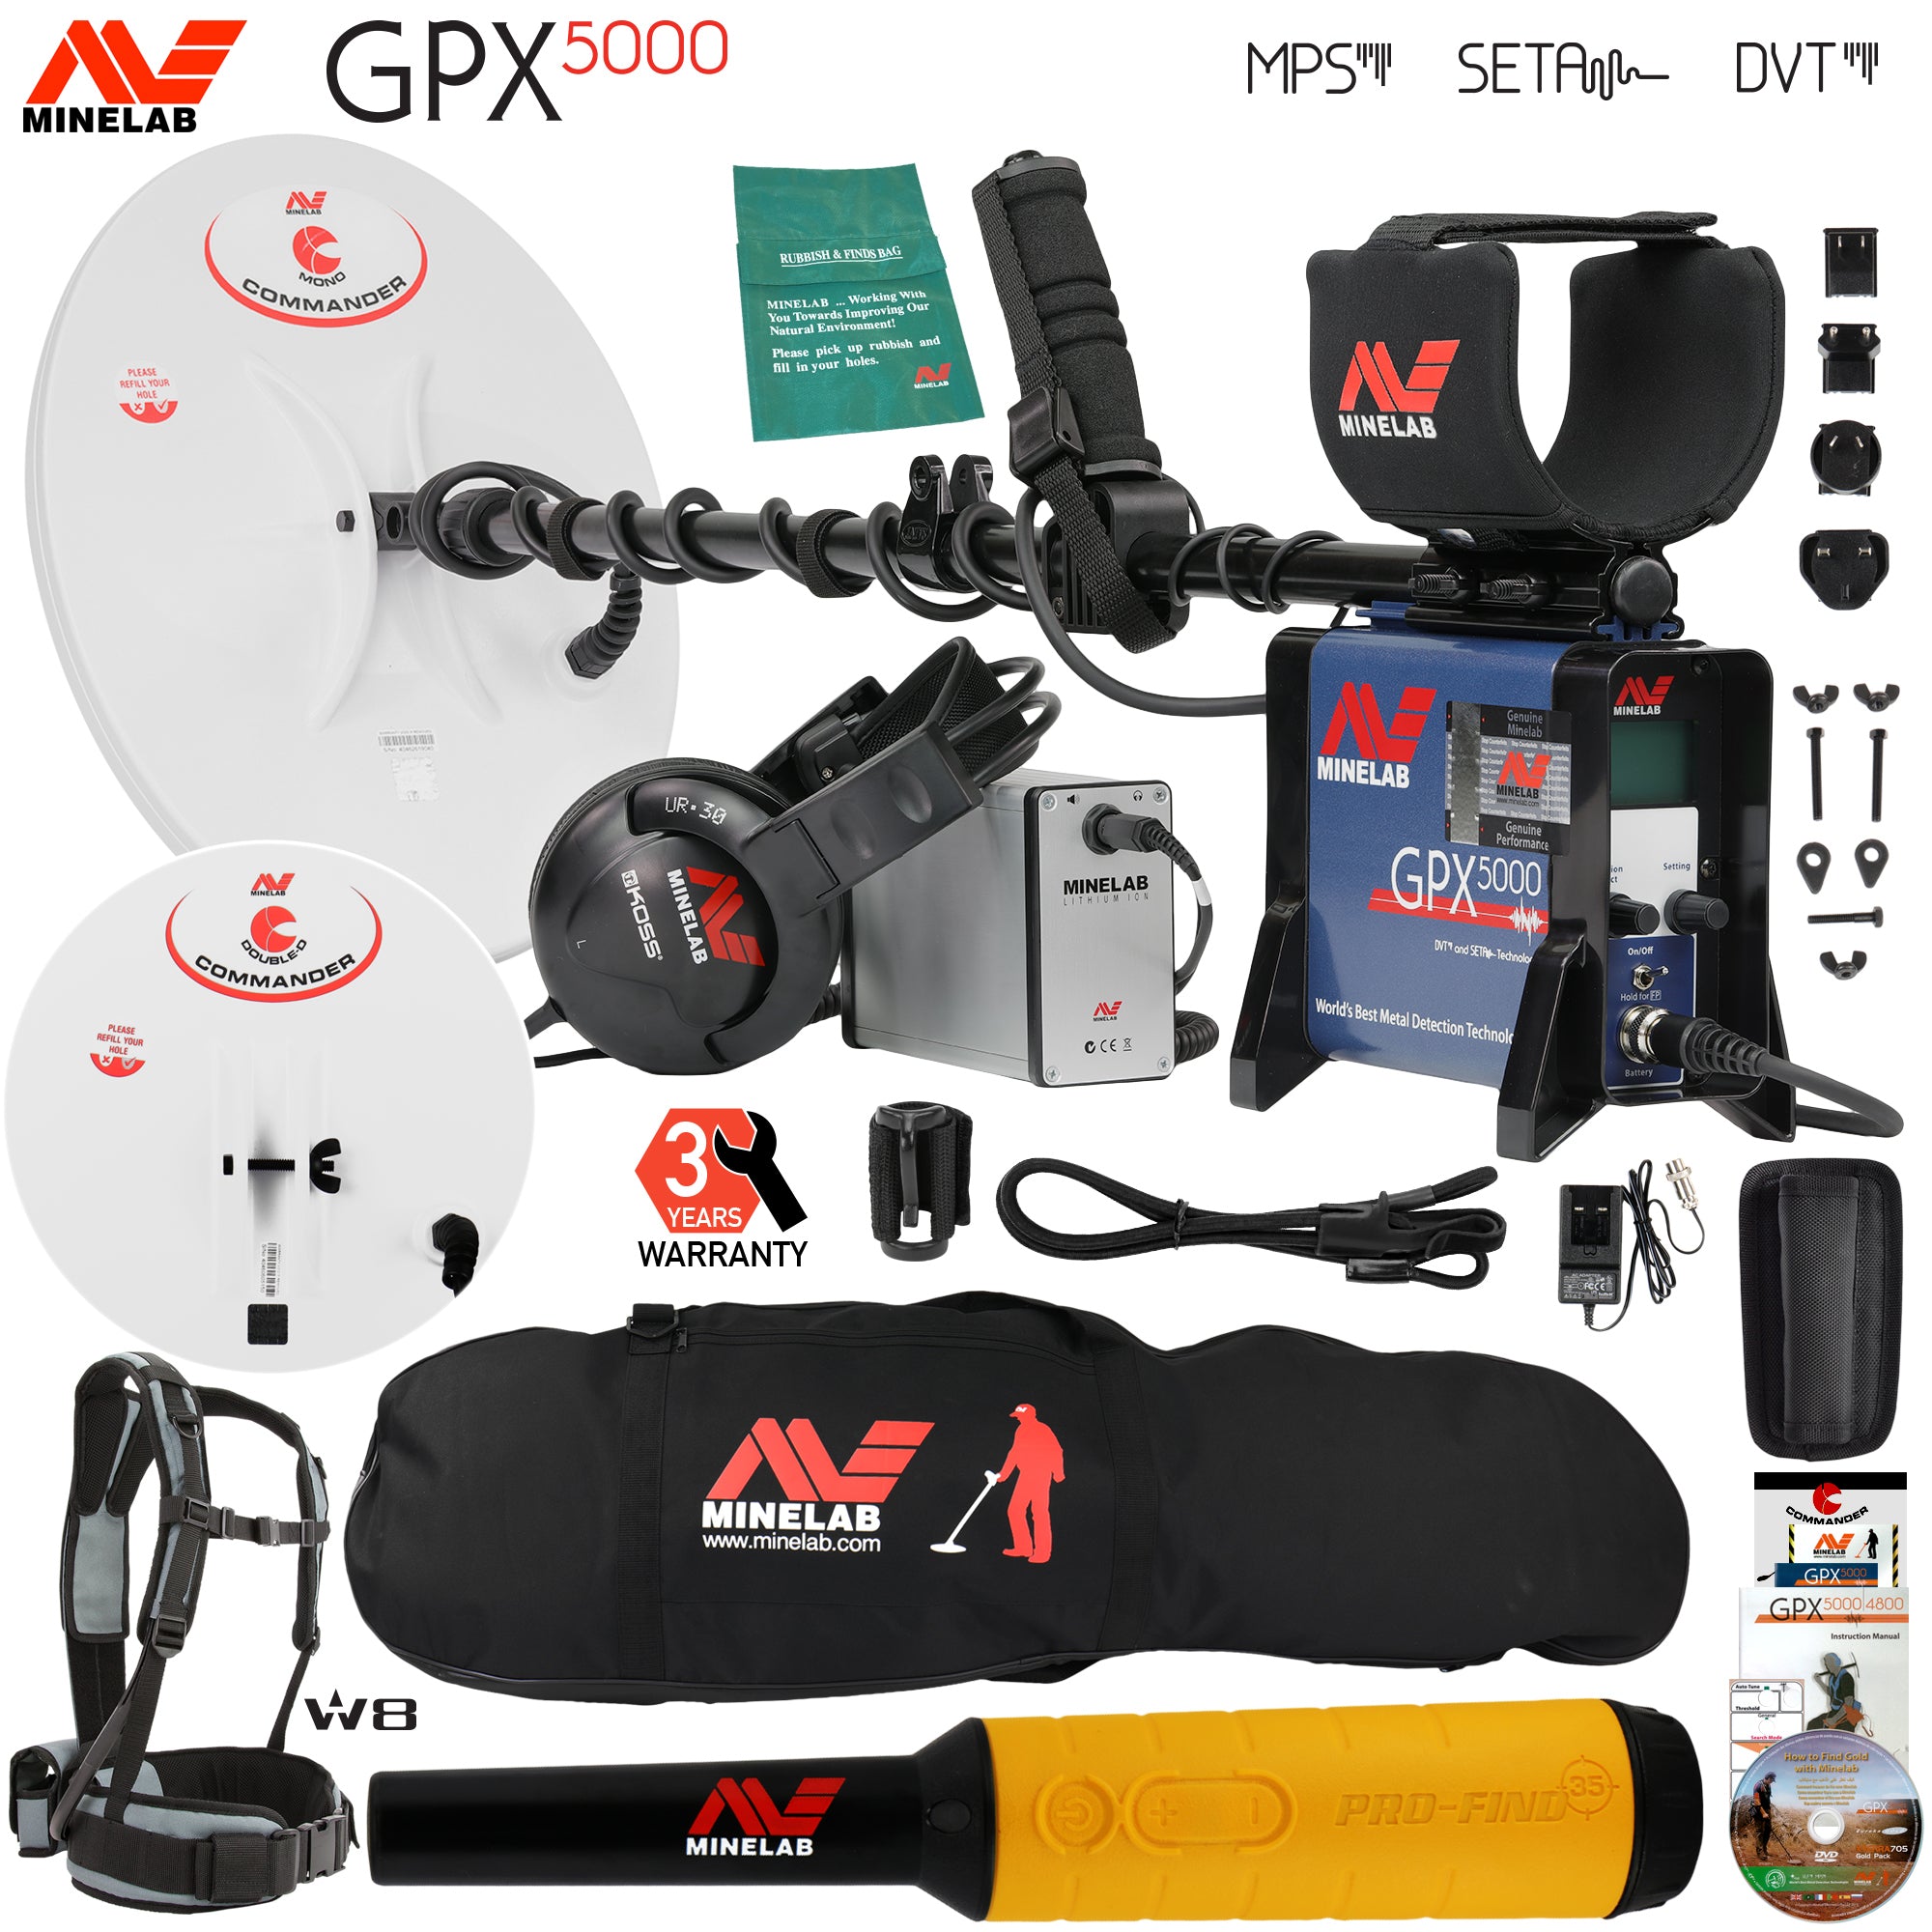 MINELAB GPX 5000 Metal Detector Special with PRO-Sonic Wireless Audio System 